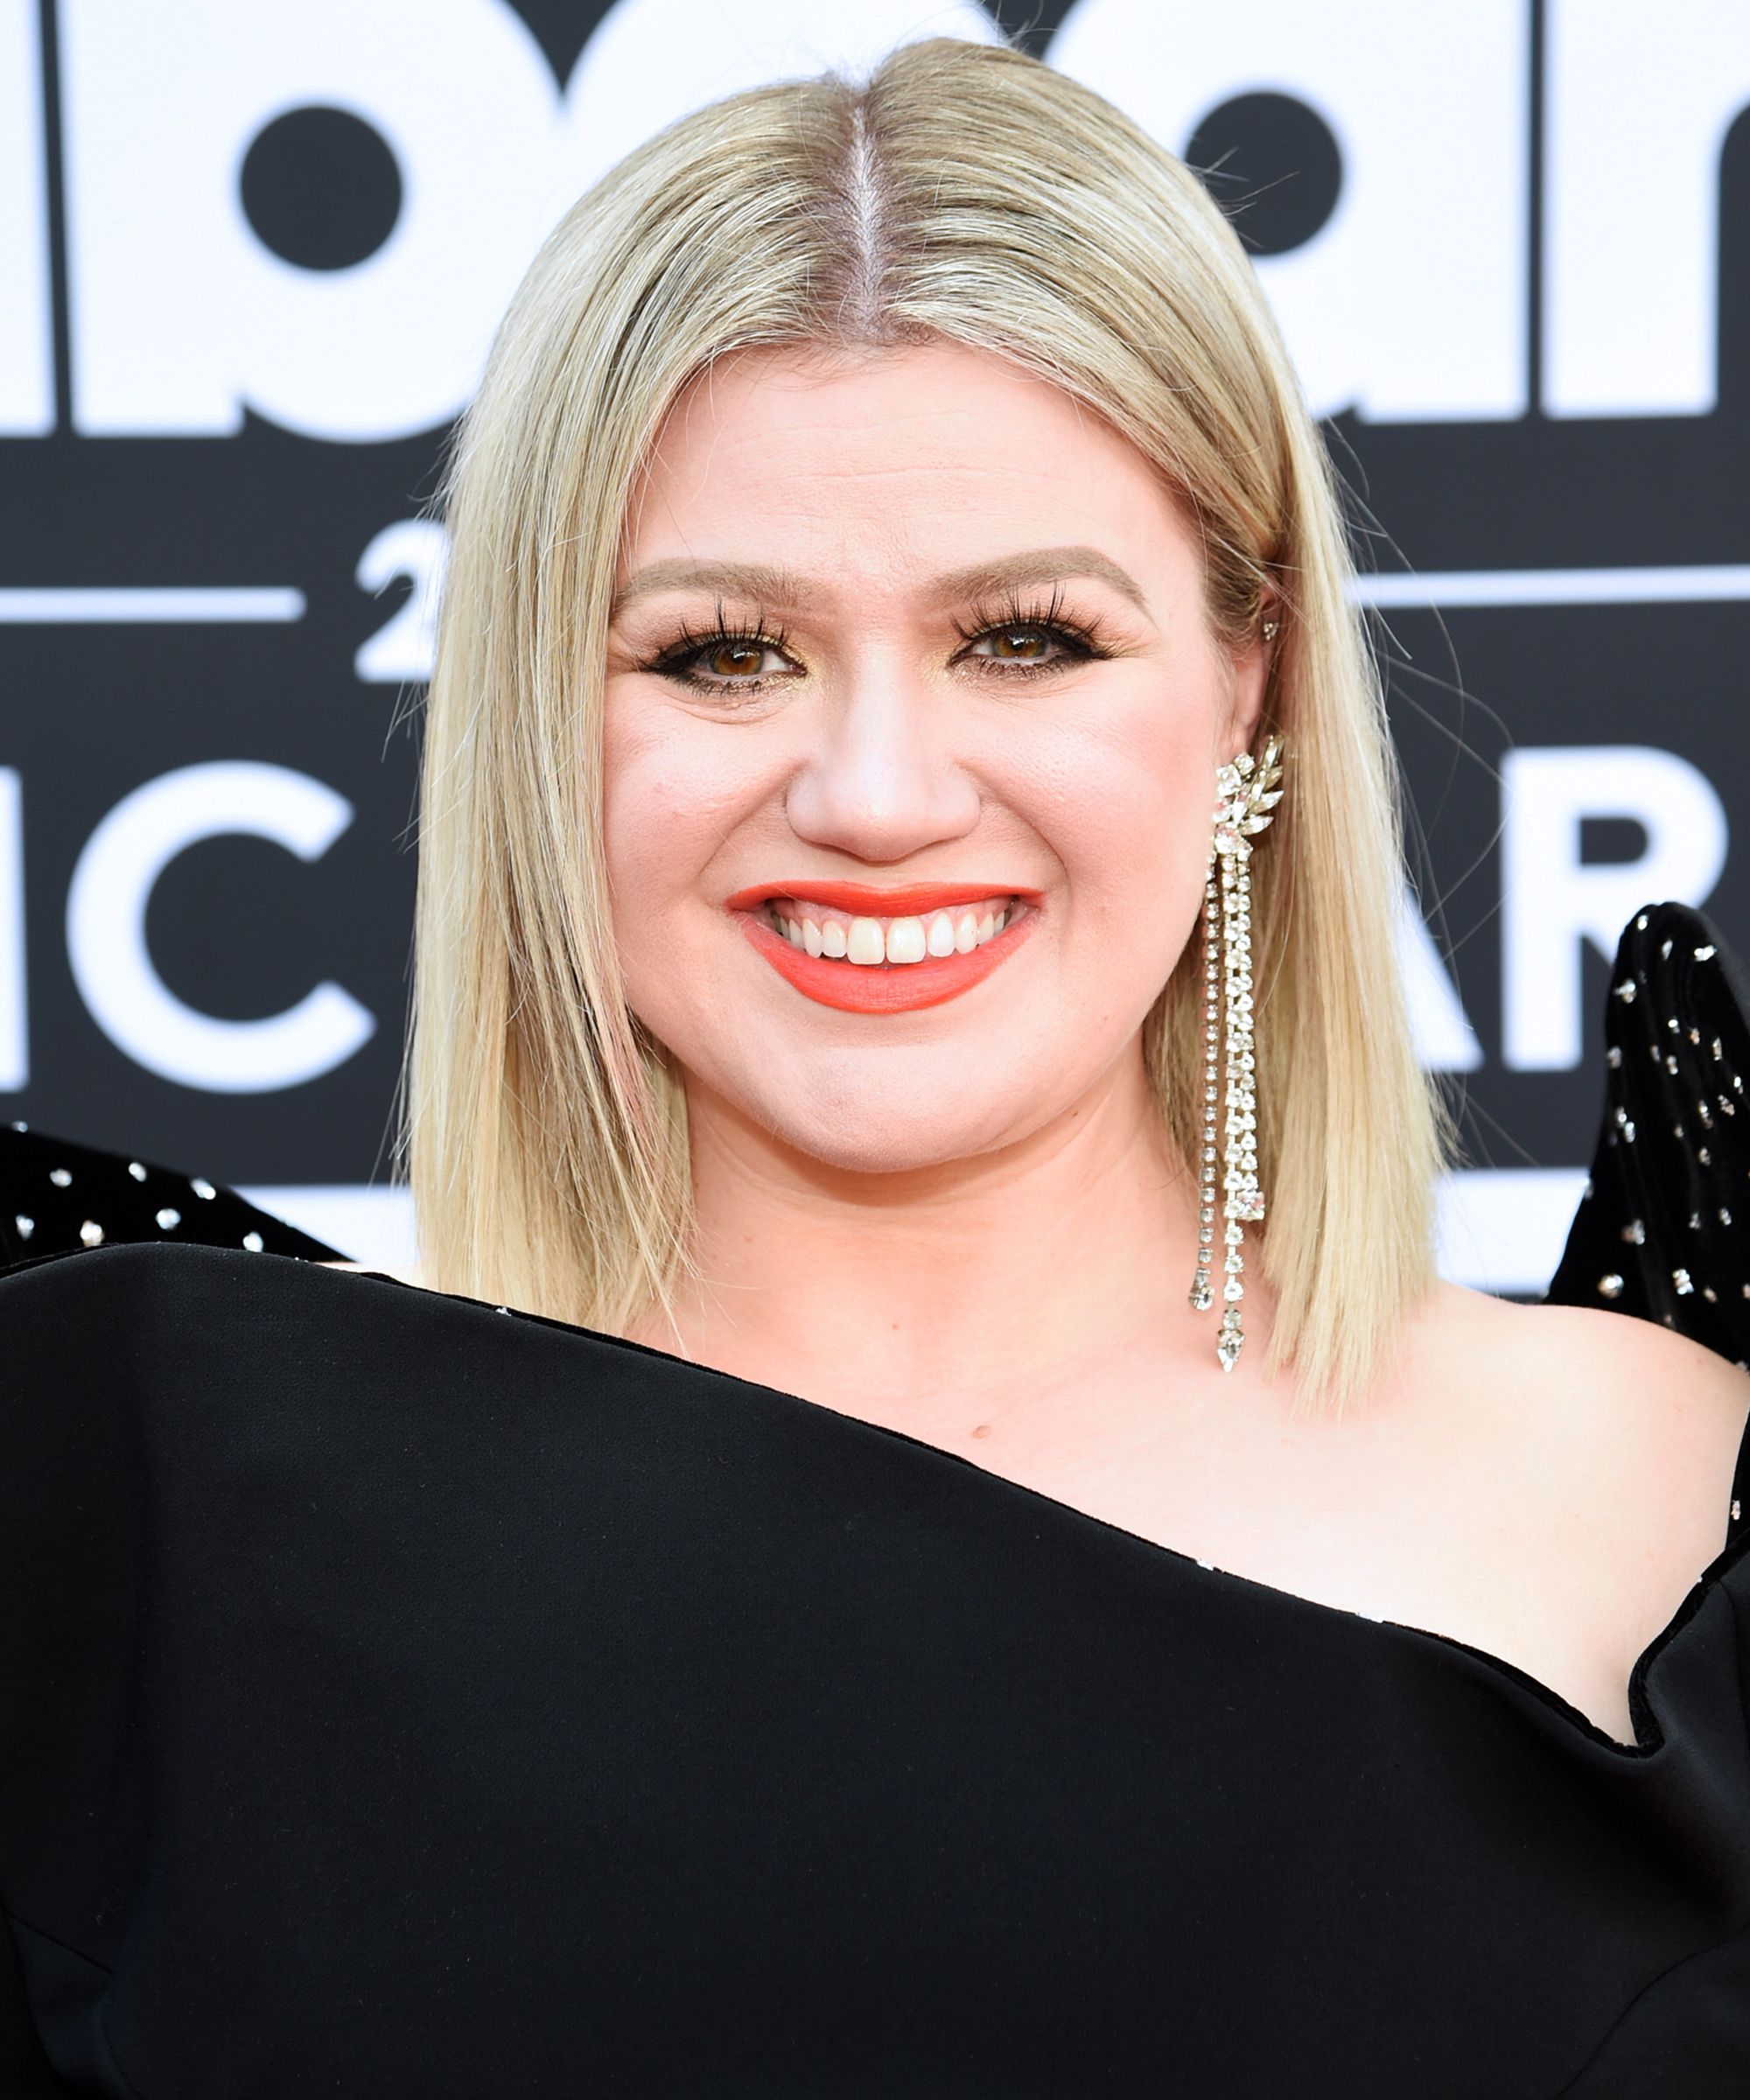 this was the most popular hairstyle at the billboard awards